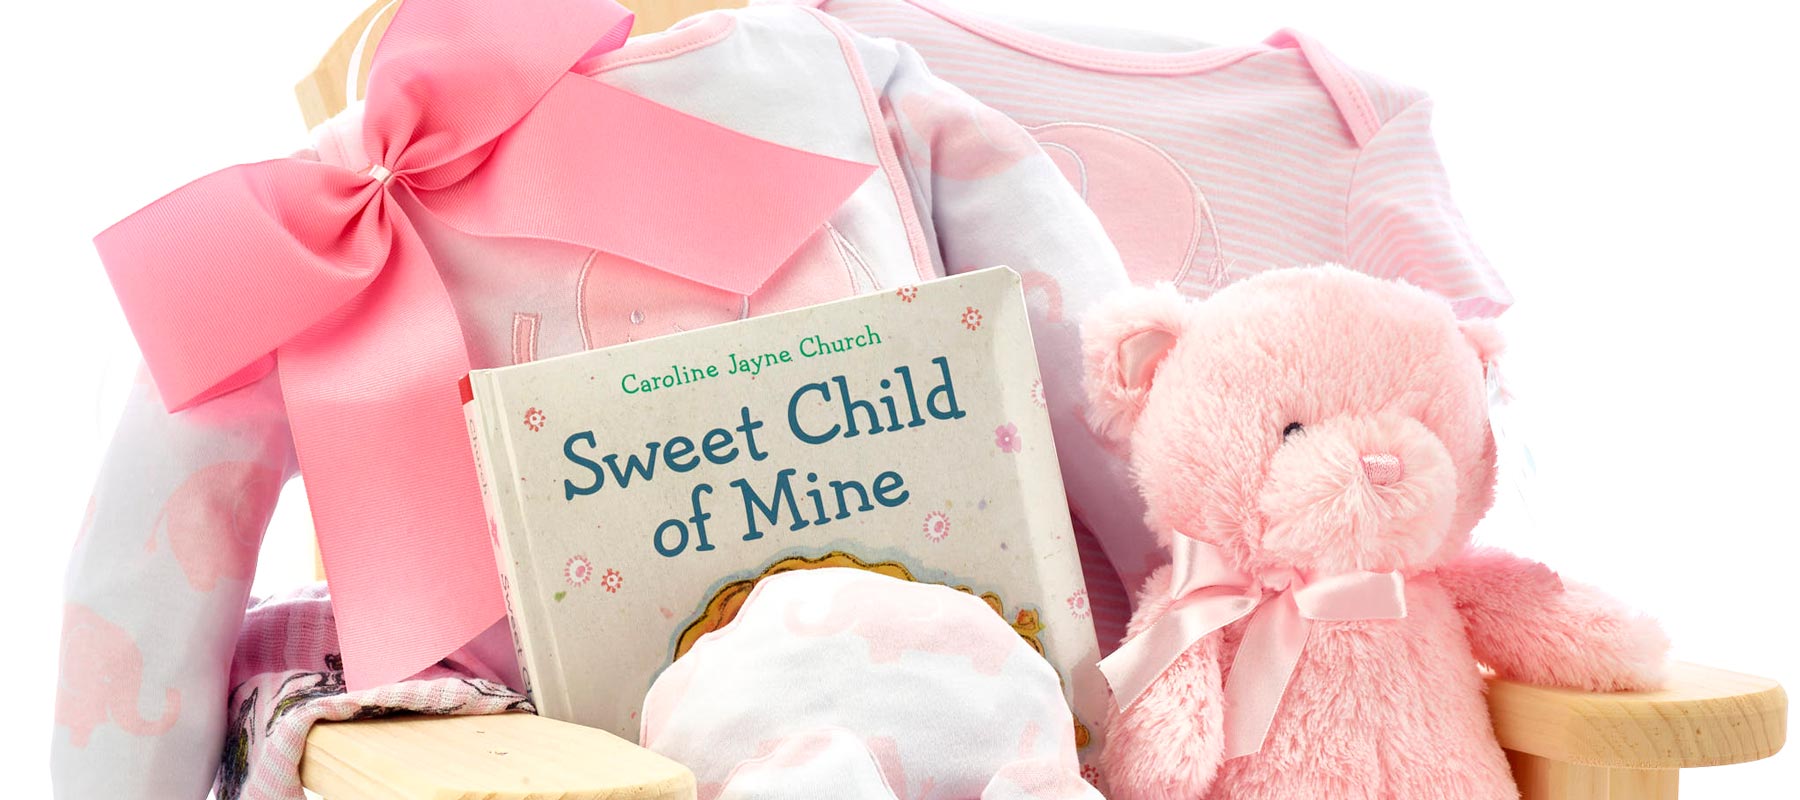 What are the Best Gifts for a Coworkers Baby Shower?